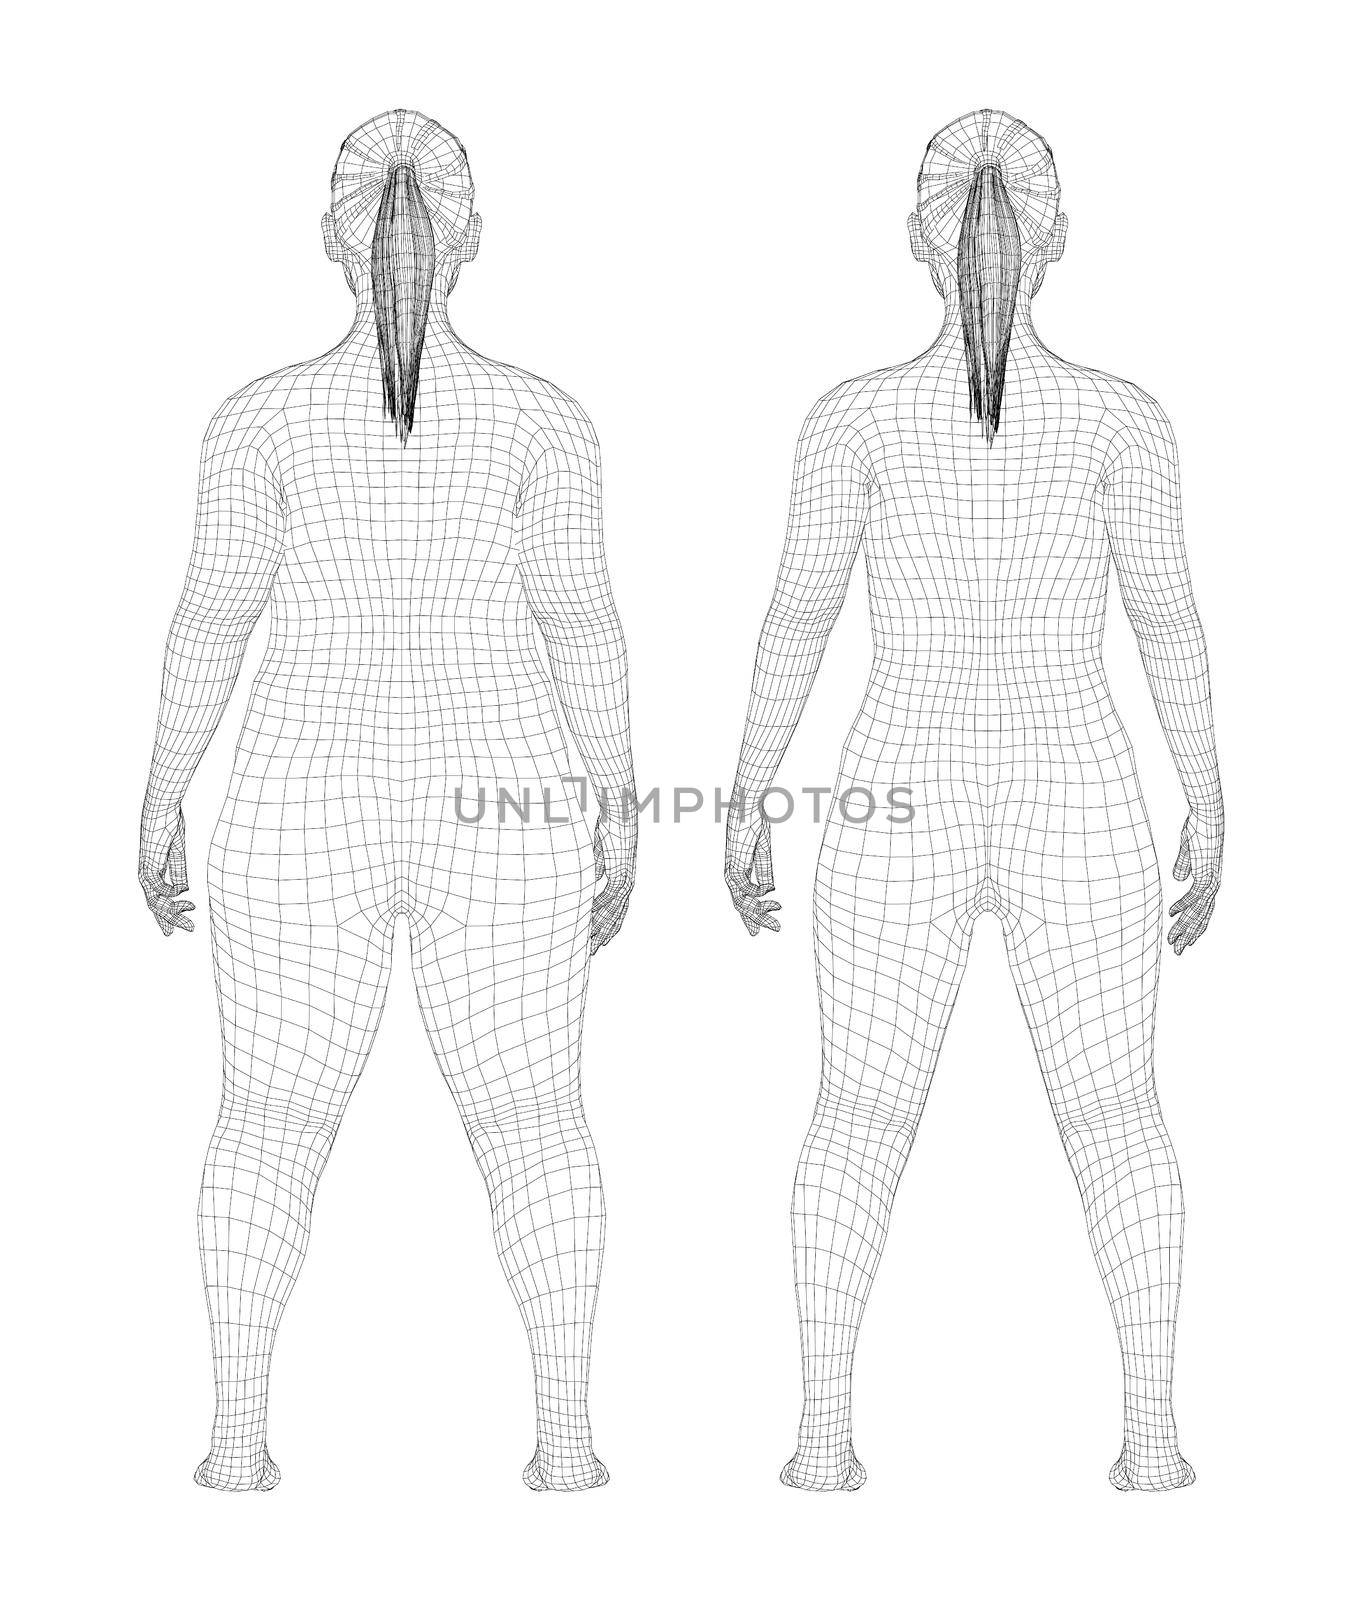 Fat and slim woman, before and after weight loss. 3d illustration. Rear view